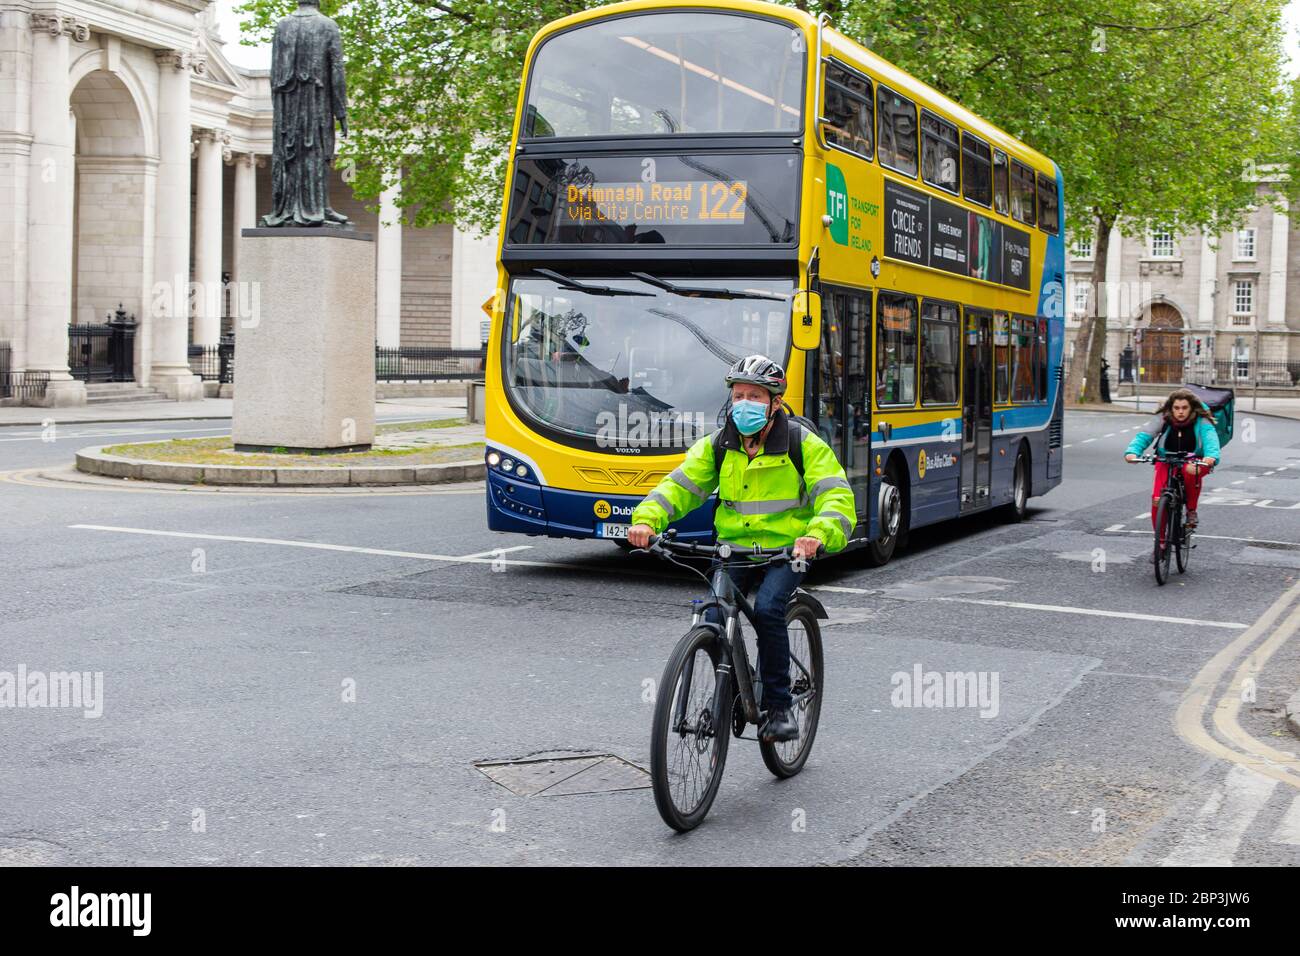 Cyclist wearing protective face mask and Dublin bus going through College Green in Dublin City Centre. Covid-19 pandemic restrictions. Stock Photo